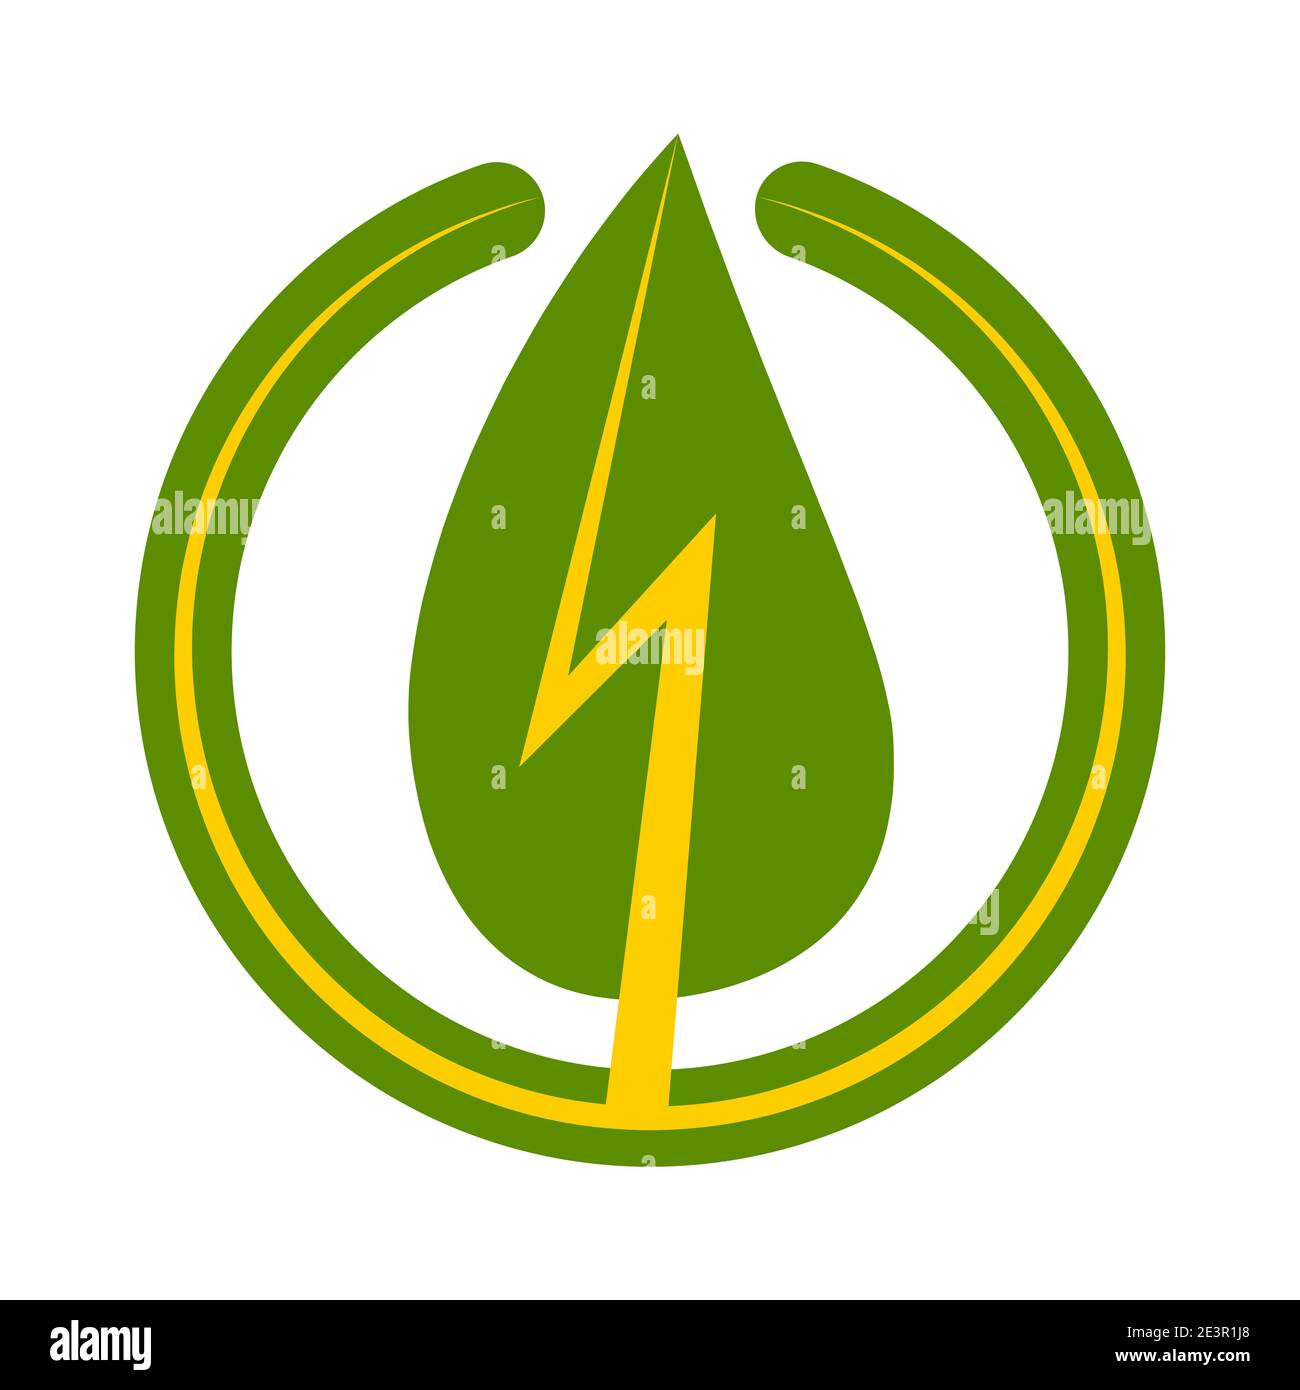 Green energy sign icon, vector green leaf with a lightning bolt in a circle symbol of renewable environmentally friendly energy Stock Vector